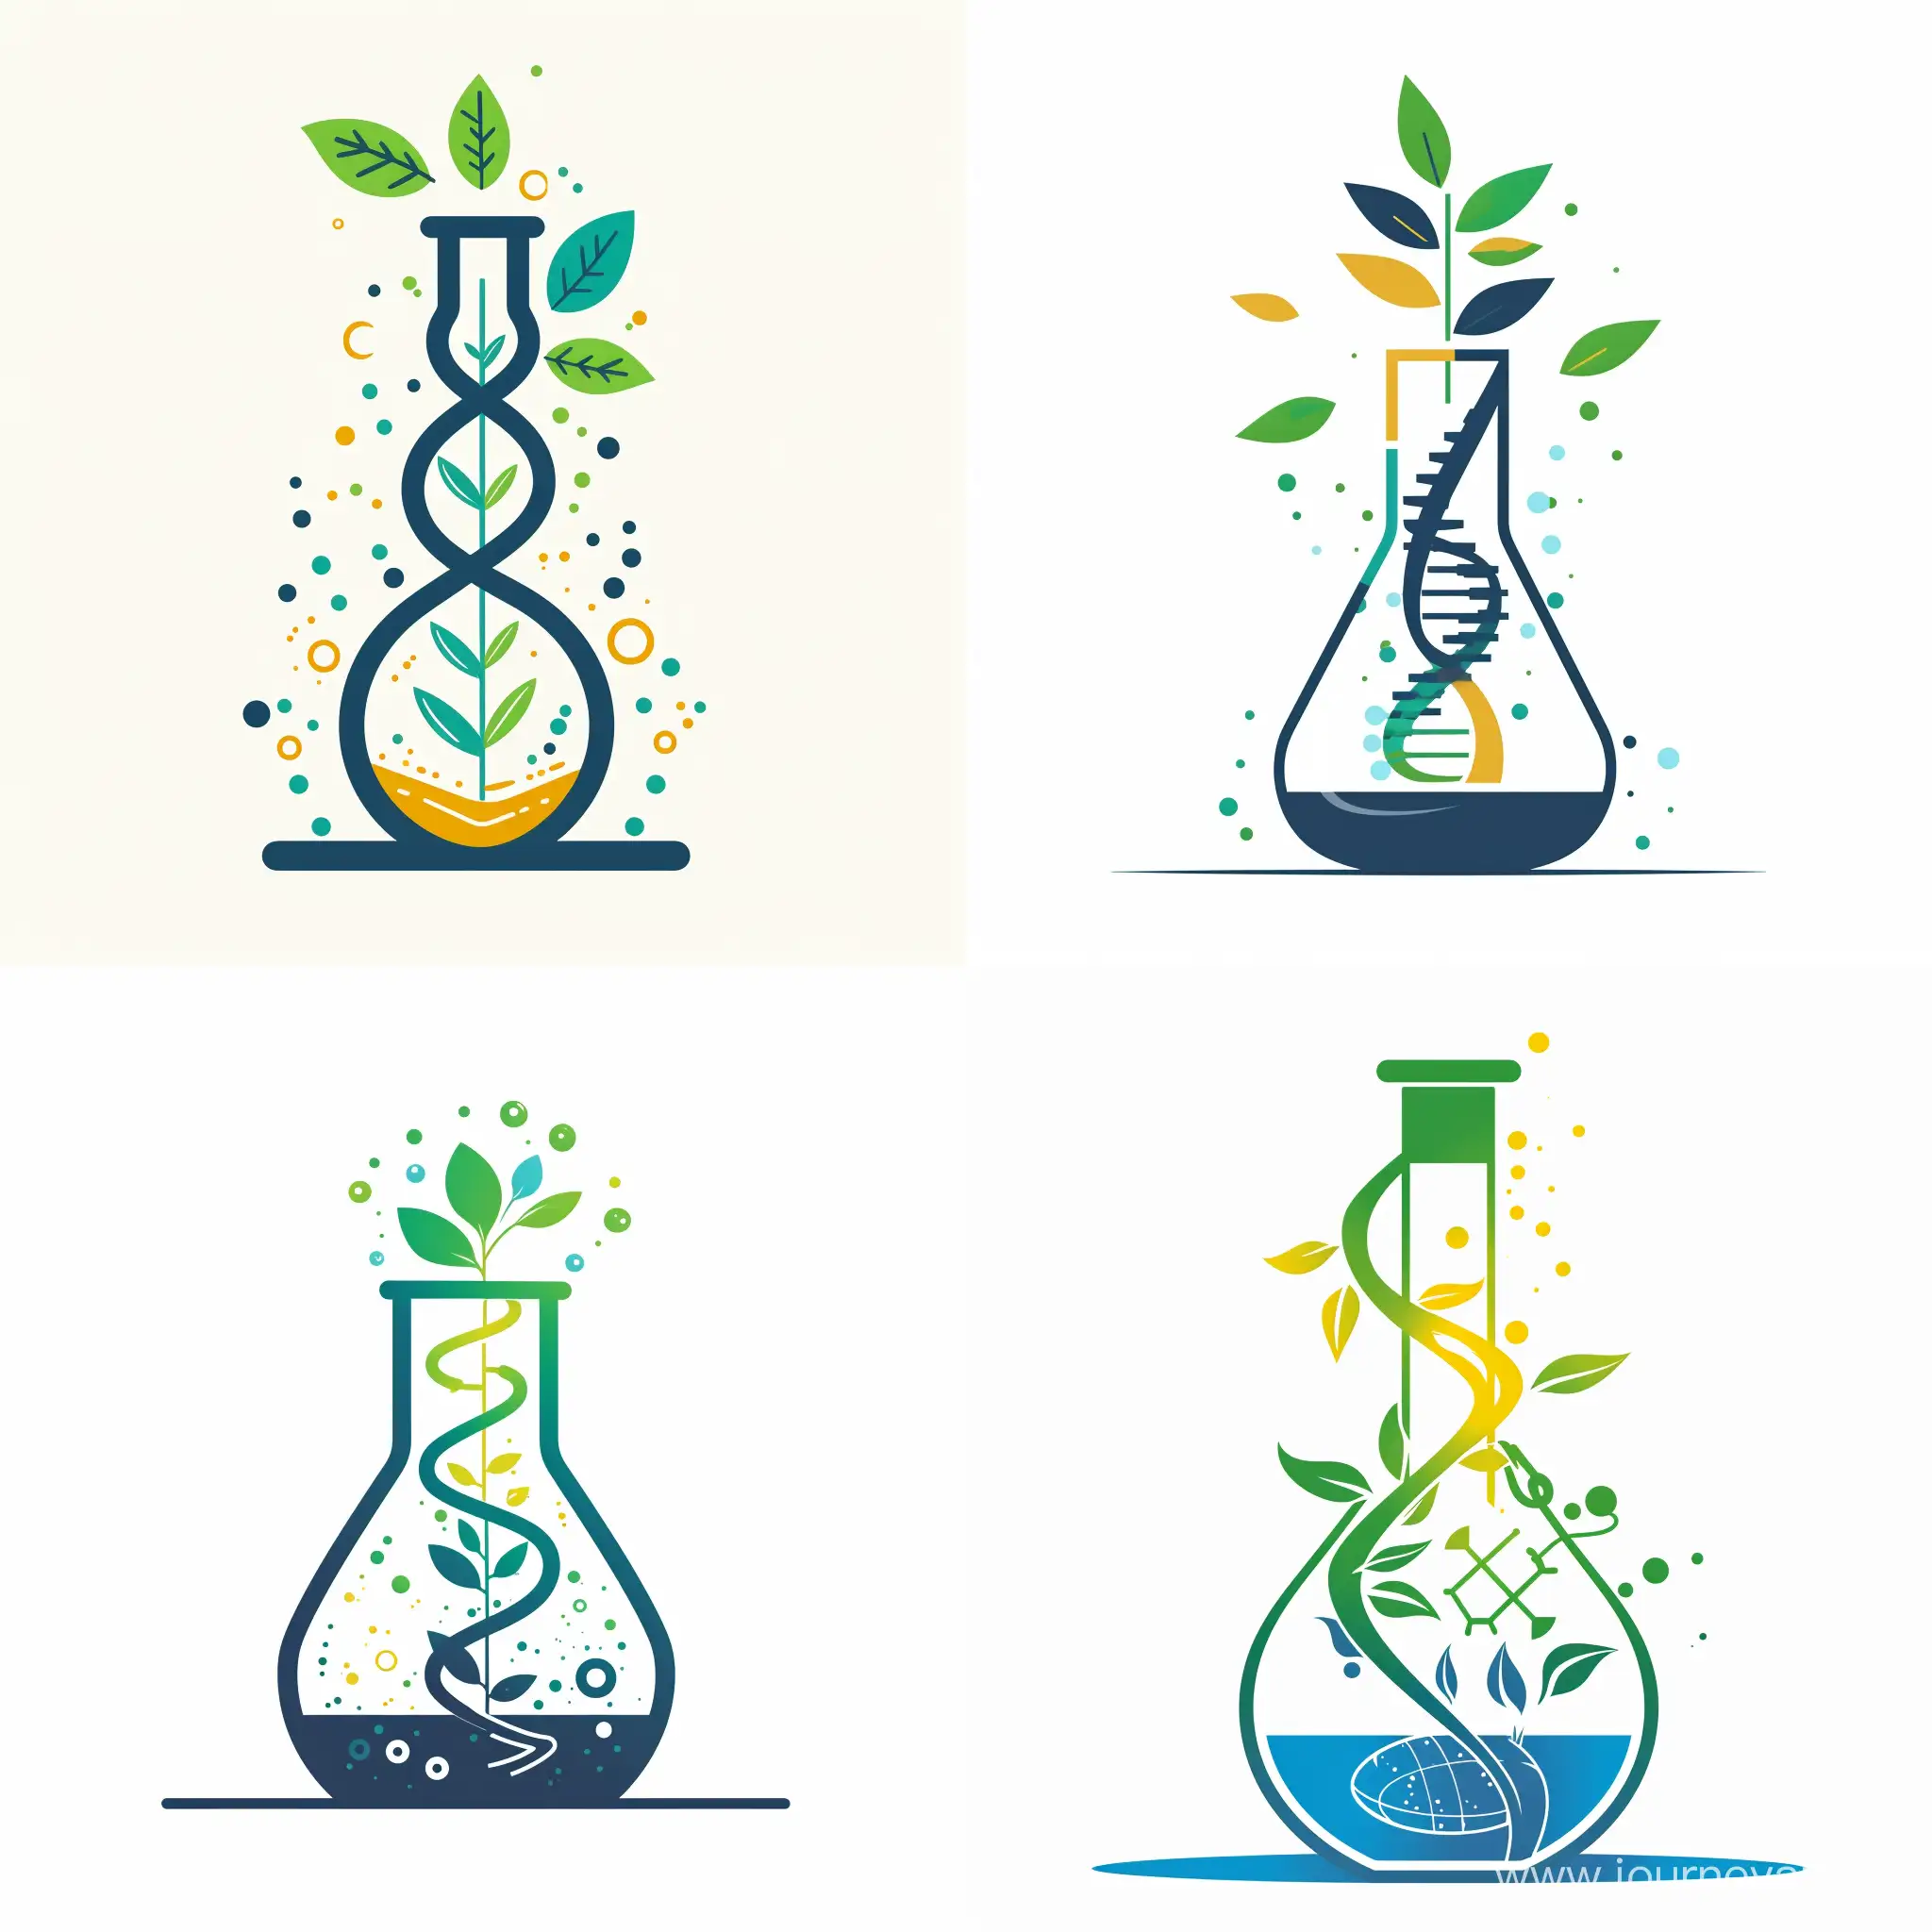 Concept 6: Biotech Growth:**

* **Image:** A glass beaker containing a stylized plant emerging from a double helix DNA strand. The plant reaches upwards, symbolizing growth and the power of biotechnology.
* **Colors:** Green (plants, growth), blue (clean energy, environment), and a vibrant accent color for the DNA strand (representing innovation).
* **Font:** Modern, yet organic typeface in English and Farsi.
* **Tagline (optional):** "Biotech for a Greener Future" (in English and Farsi)

**Concept 7: Sustainable Alchemy:**

* **Image:** A stylized Erlenmeyer flask with a circular flow inside. The flow incorporates plant elements and energy symbols, depicting the transformative power of biotechnology.
* **Colors:** Green (plants), blue (clean air, sky), and yellow (clean energy).
* **Font:** Clean, minimalist sans-serif typeface in English and Farsi.
* **Tagline (optional):** "Biologically Inspired Solutions for a Sustainable World" (in English and Farsi)
The logo shouldn't be crowded and standard sizes are respected.